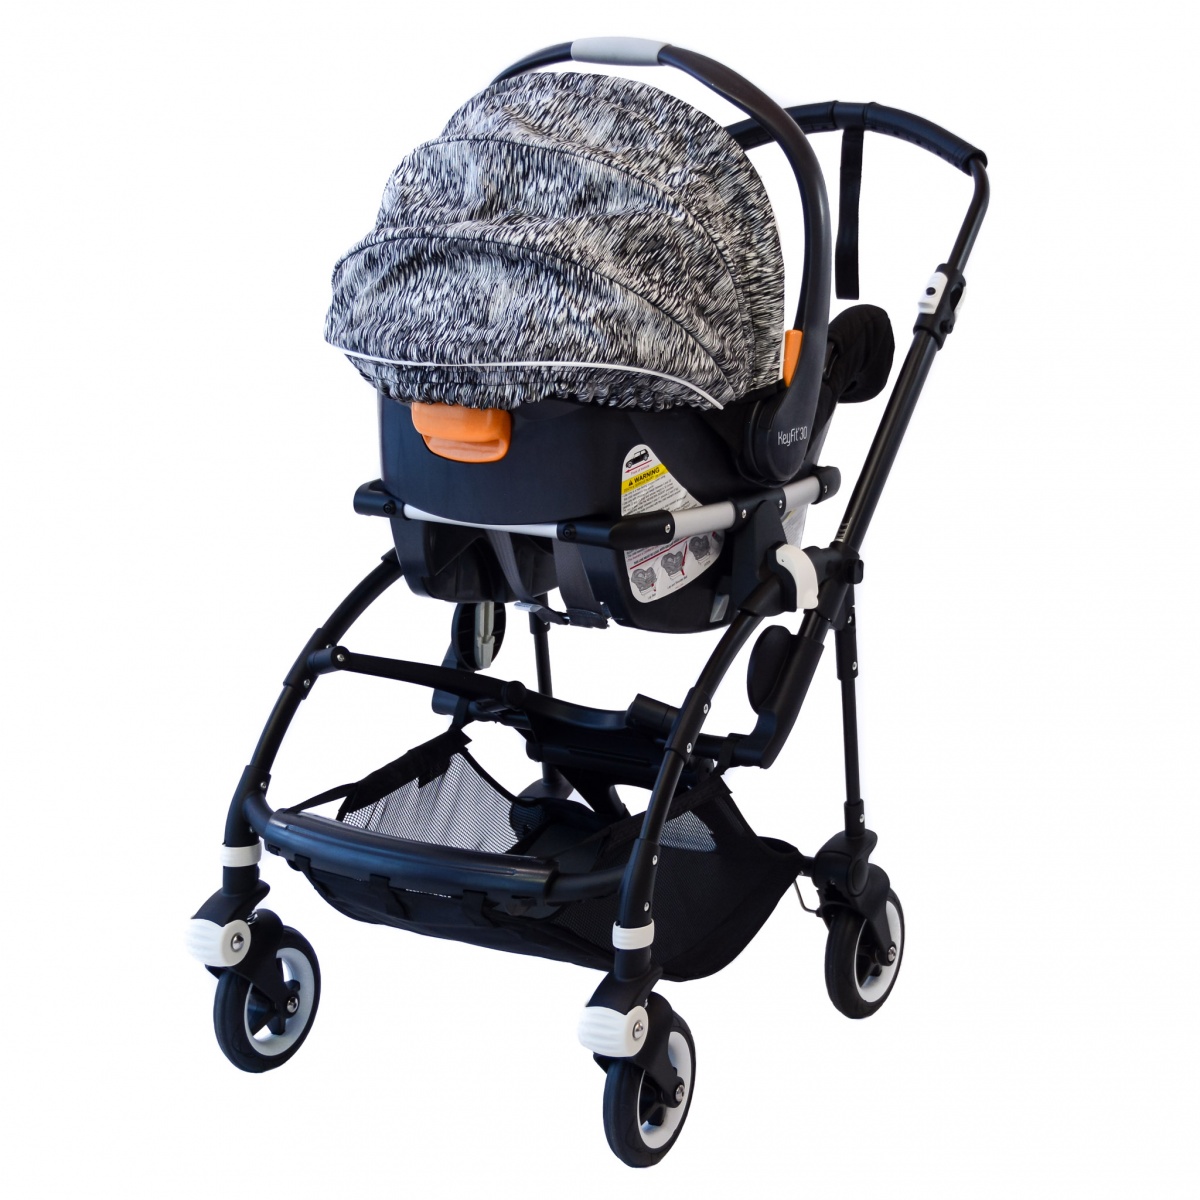 Bugaboo Bee5 Combo Review | Tested by GearLab